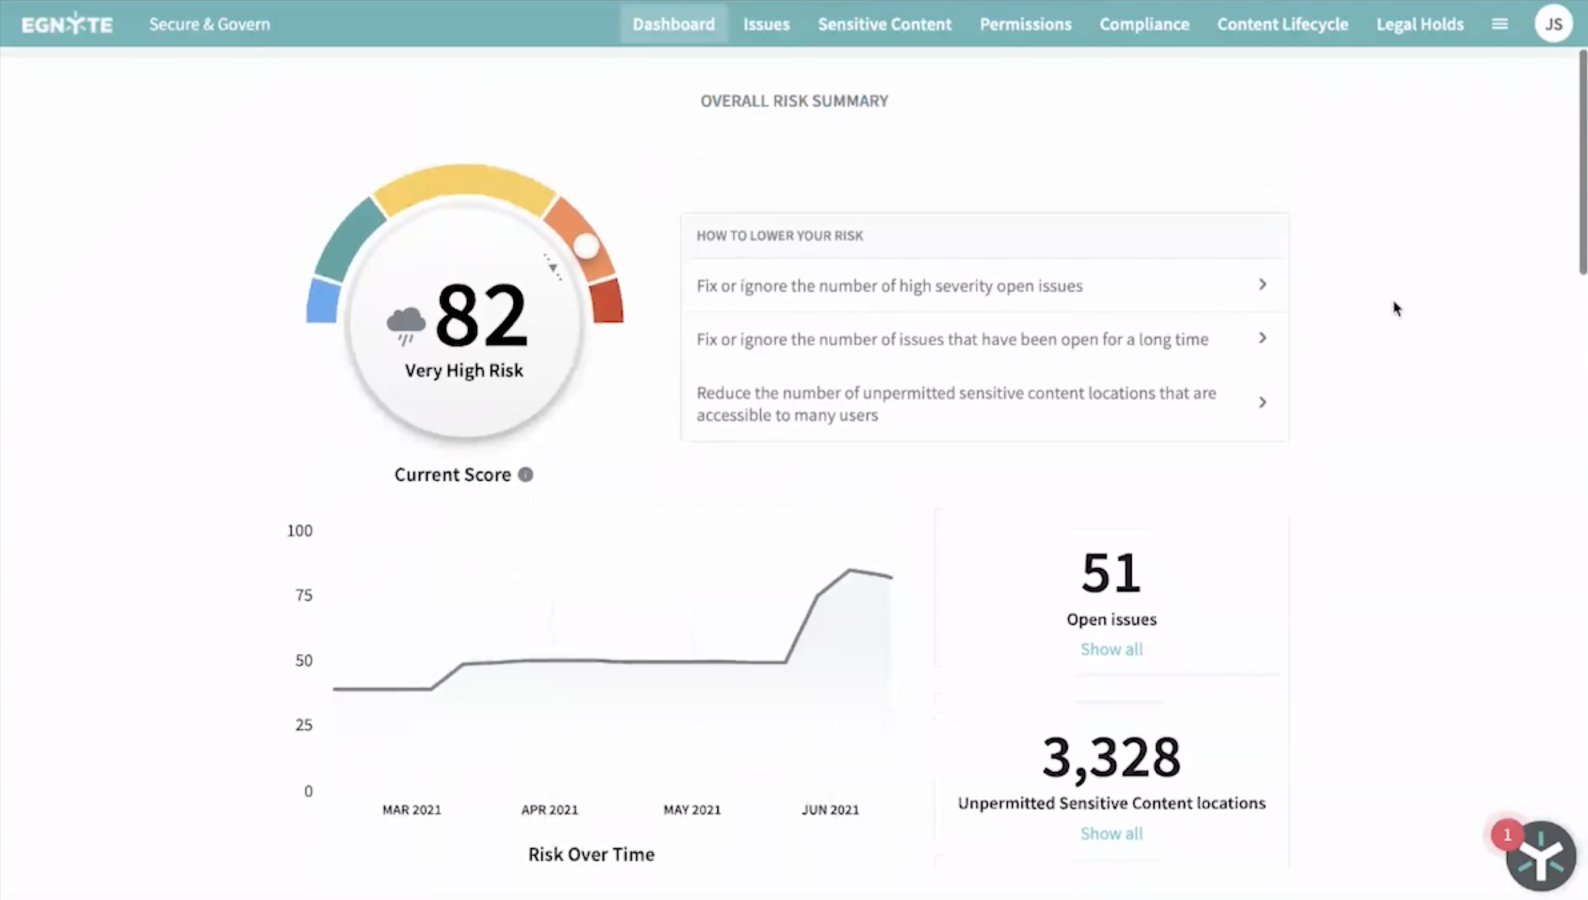 dashboard showing overall ransomware risk summary and how to lower ransomware risk